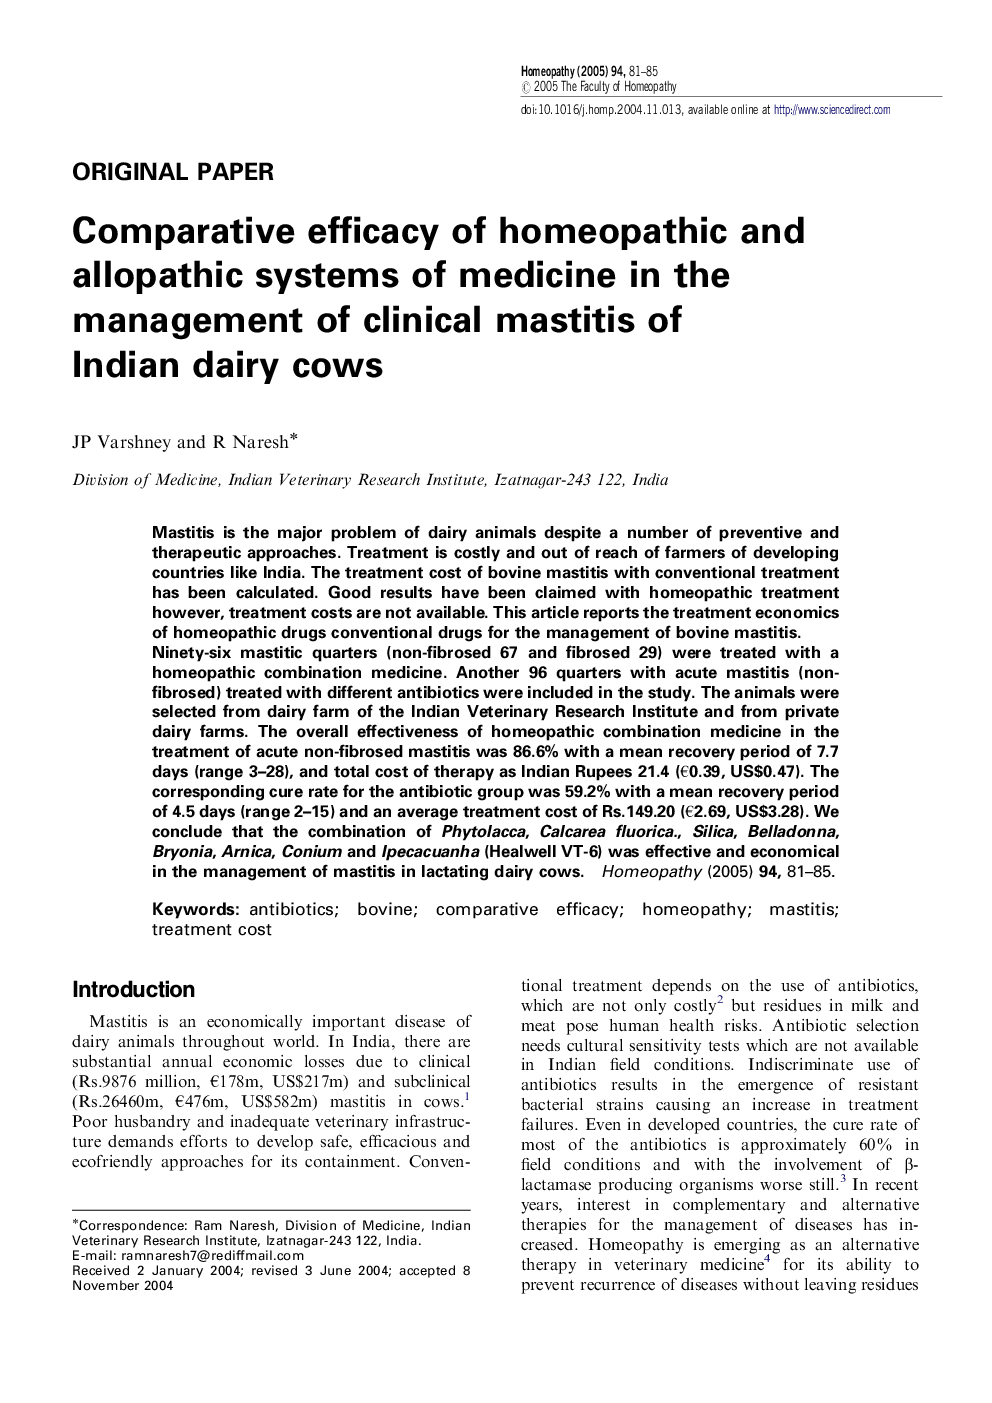 Comparative efficacy of homeopathic and allopathic systems of medicine in the management of clinical mastitis of Indian dairy cows